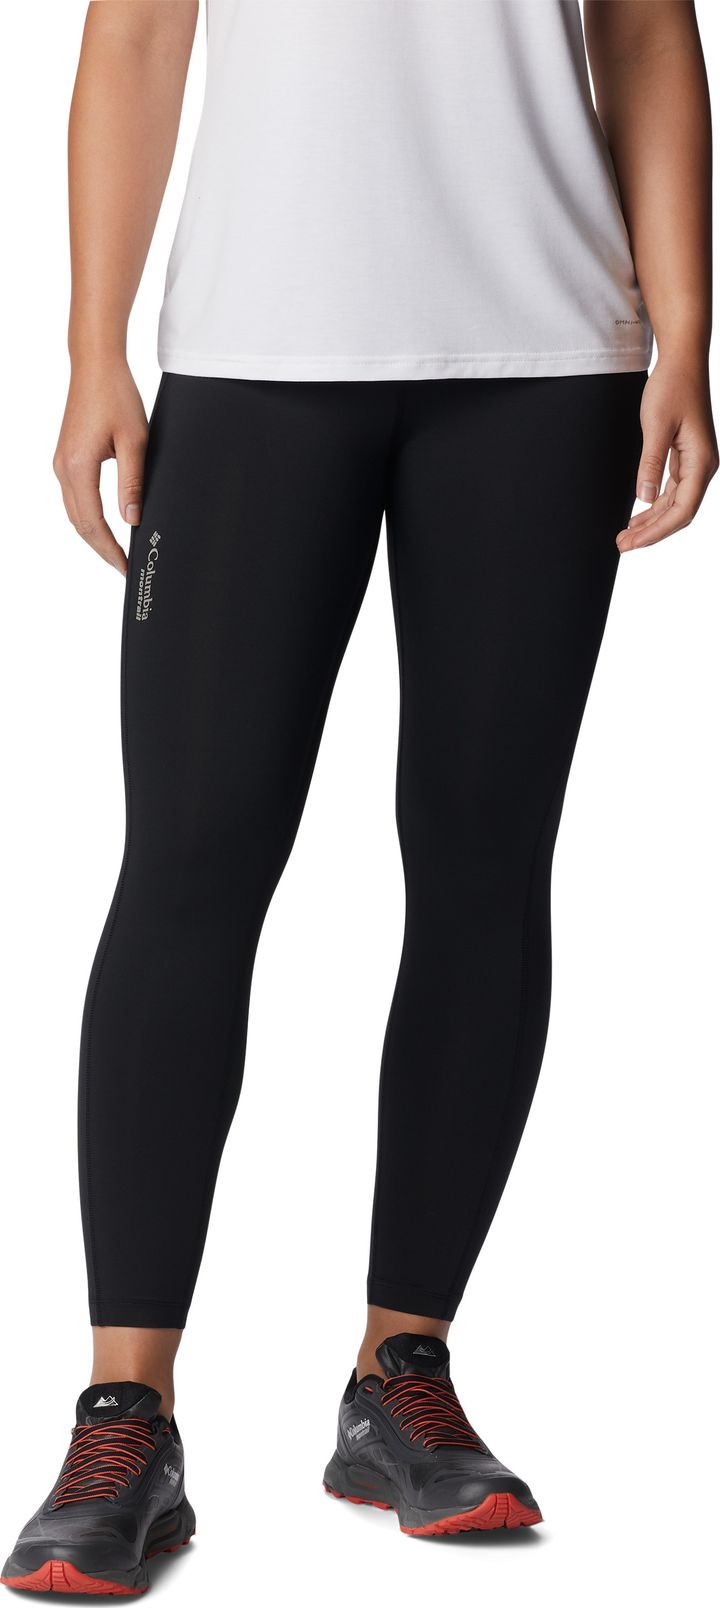 Women's Endless Trail Running Tights Black Columbia Montrail